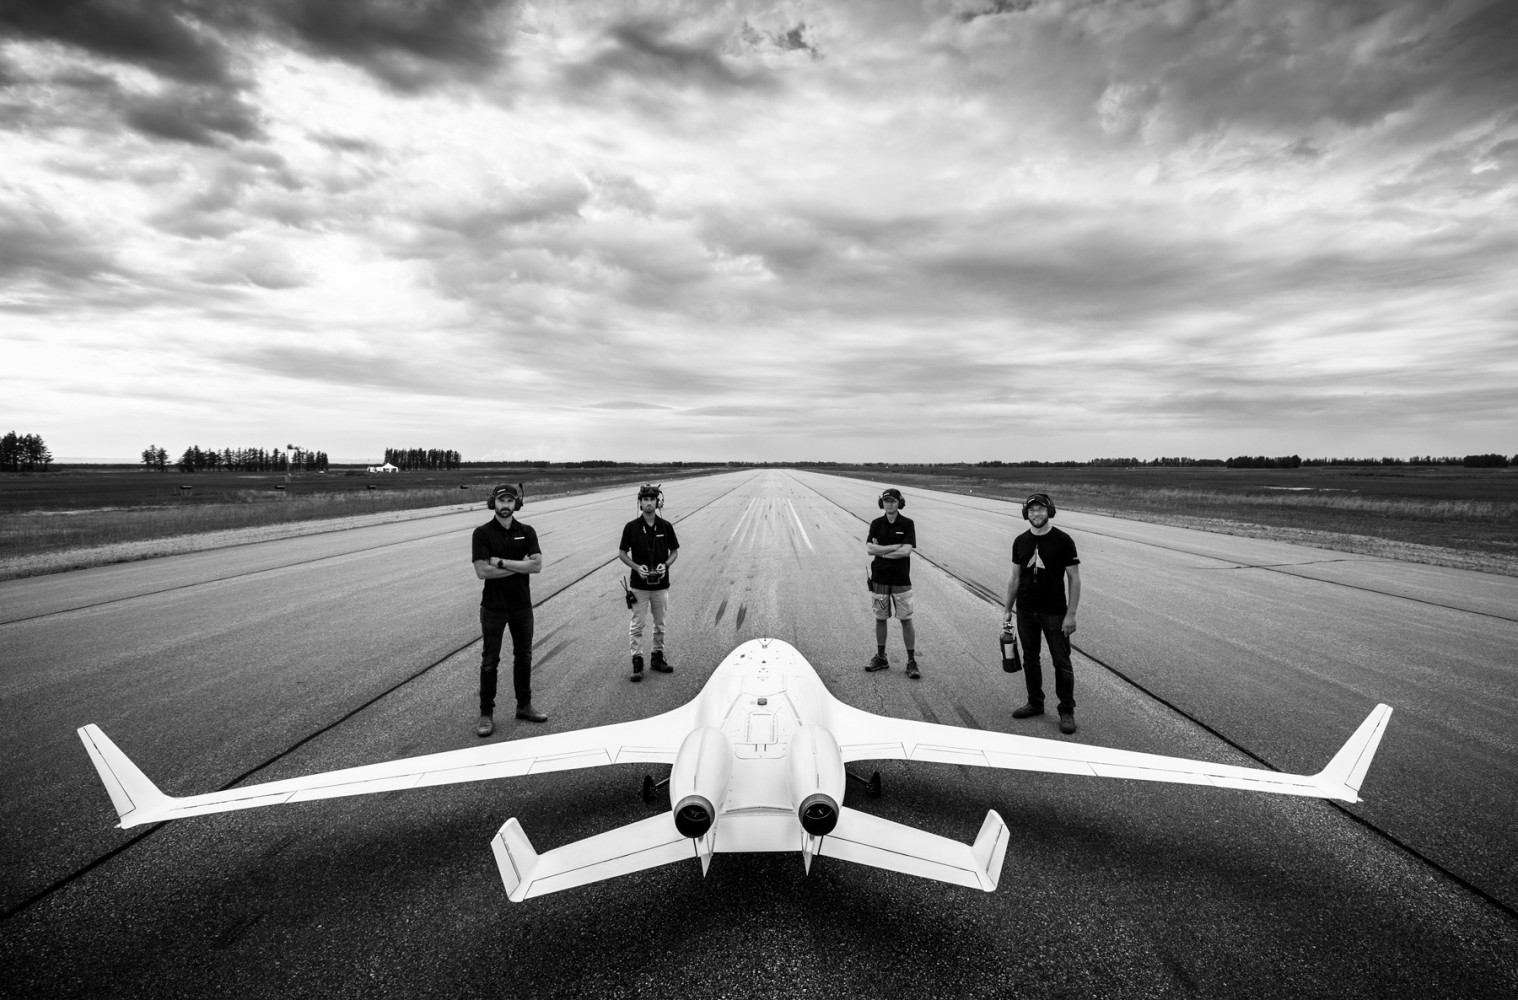 Bombardier’s EcoJet team on the runway